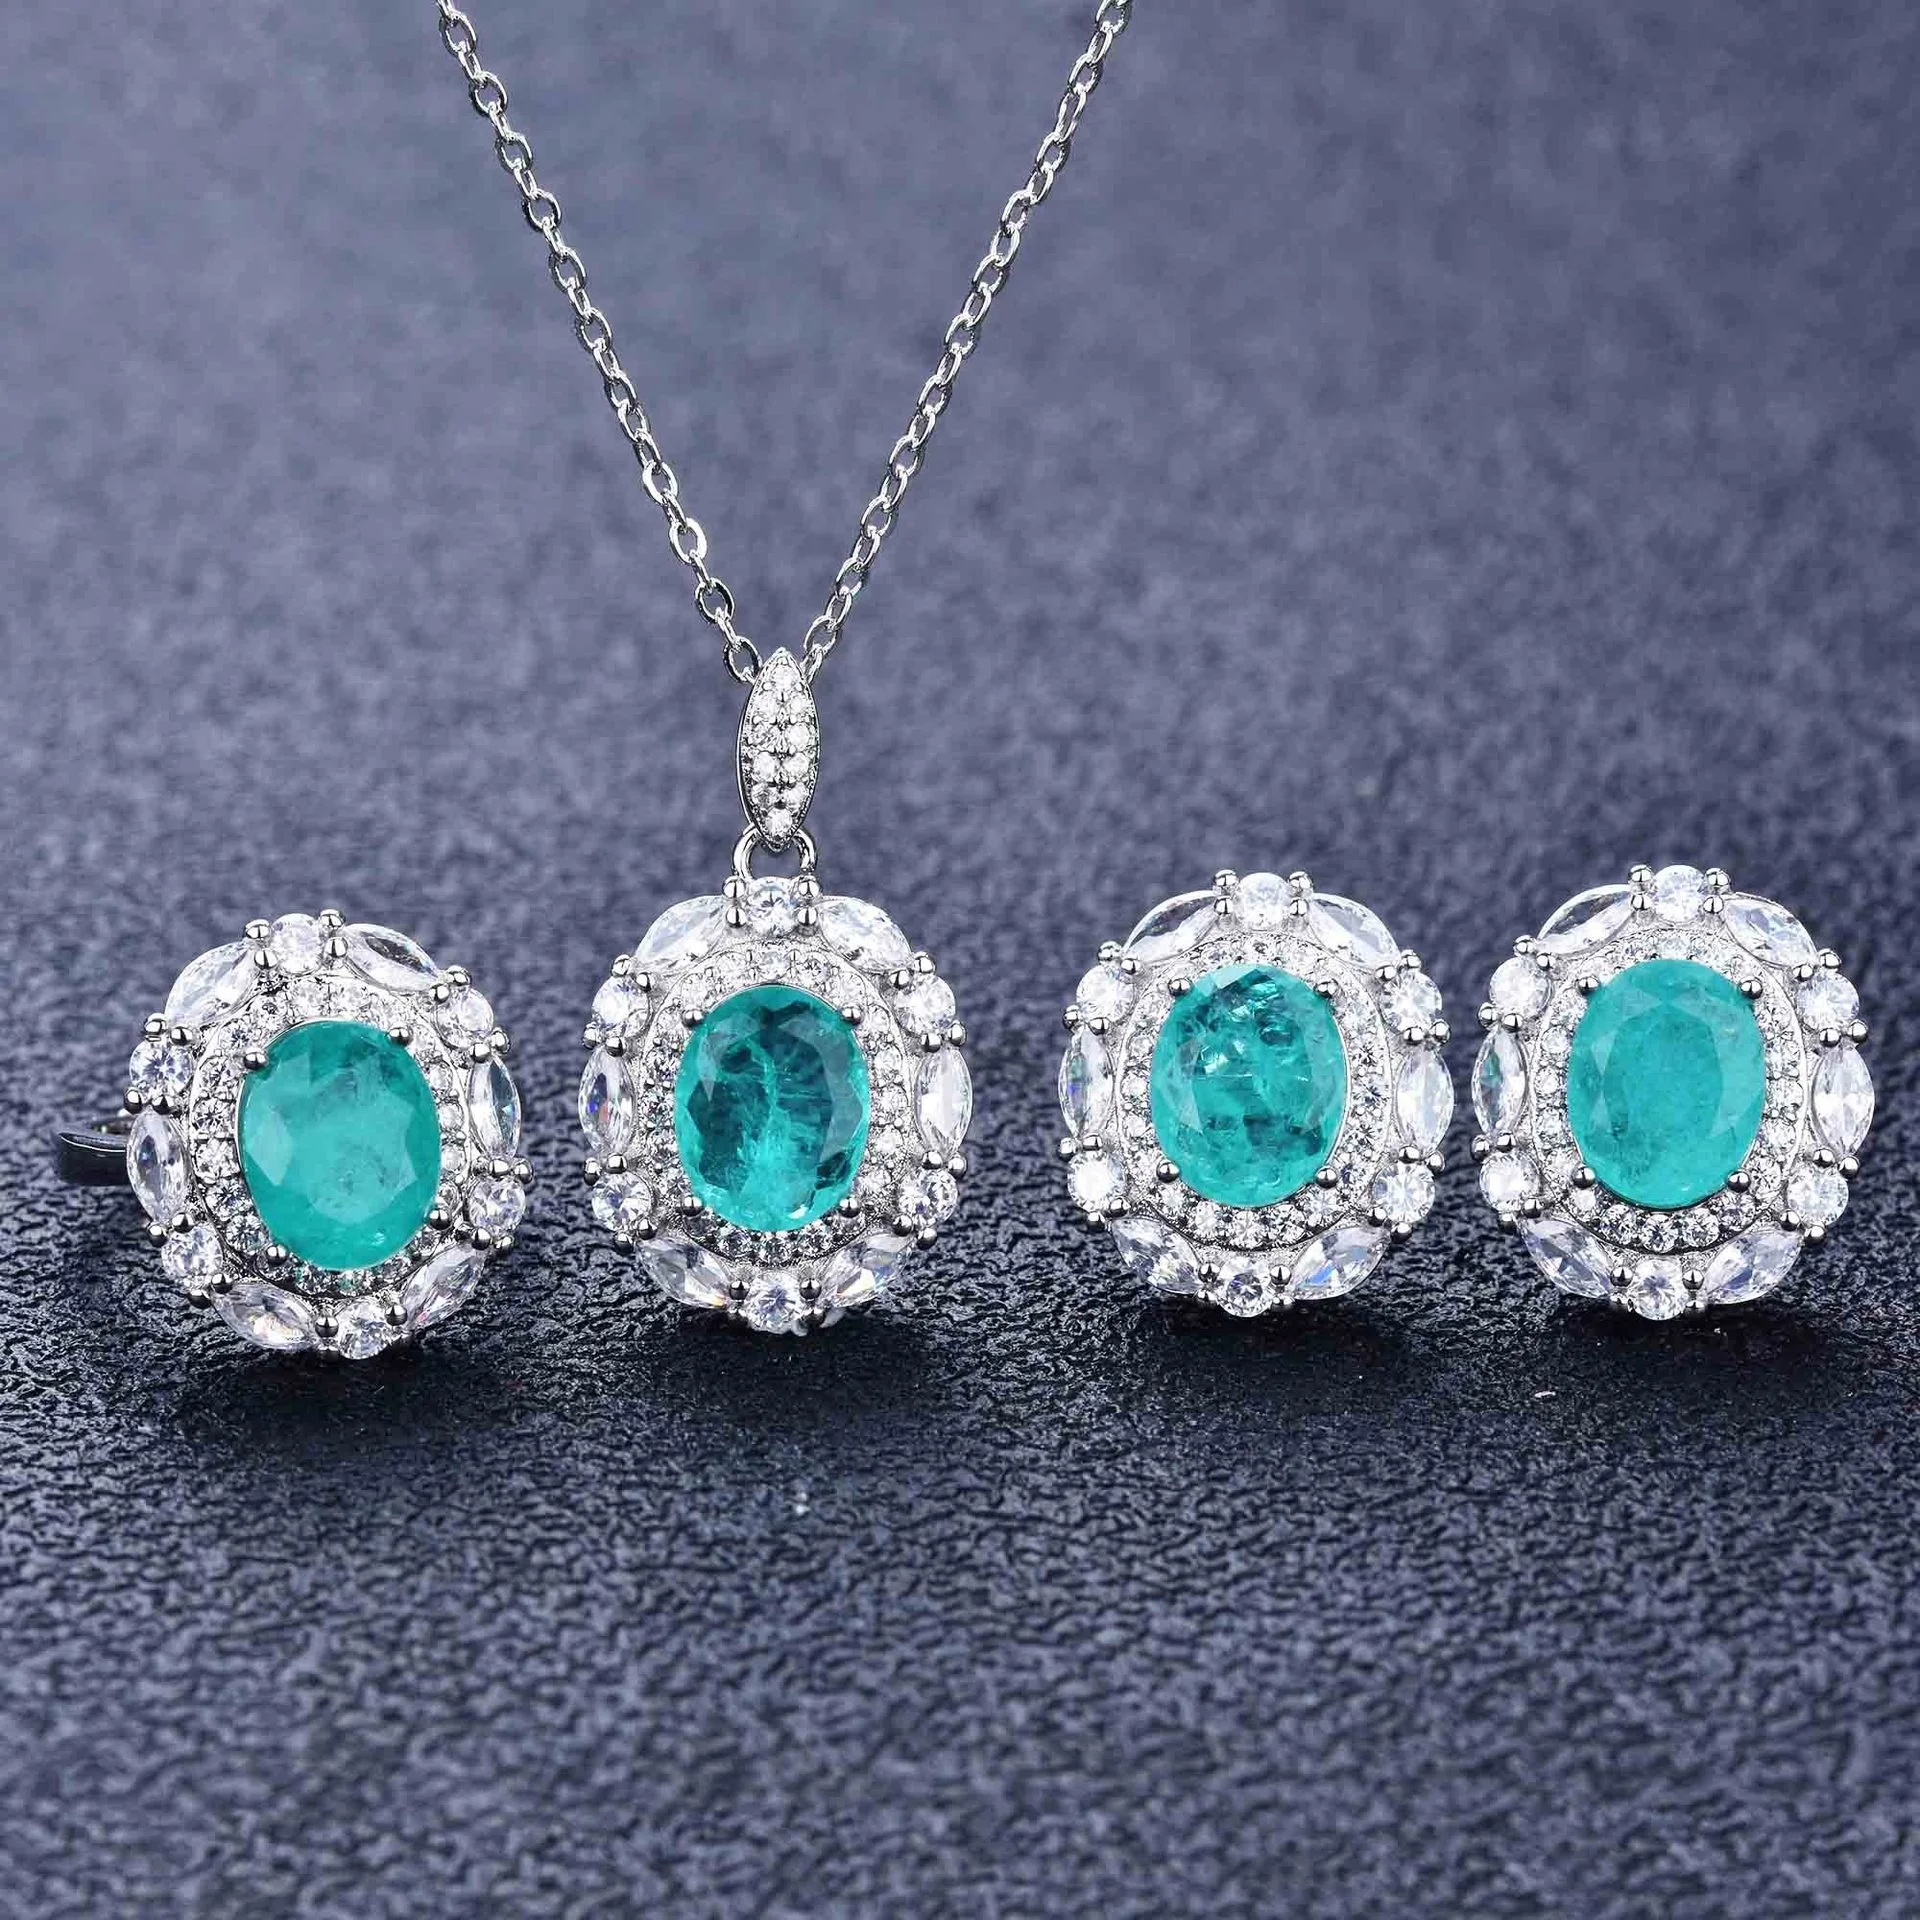 

Luxury Paraiba Tourmaline Gemstone Earrings/Pendant/Necklace/Ring Jewelry Set for Women Wedding Jewelry set, Picture shows